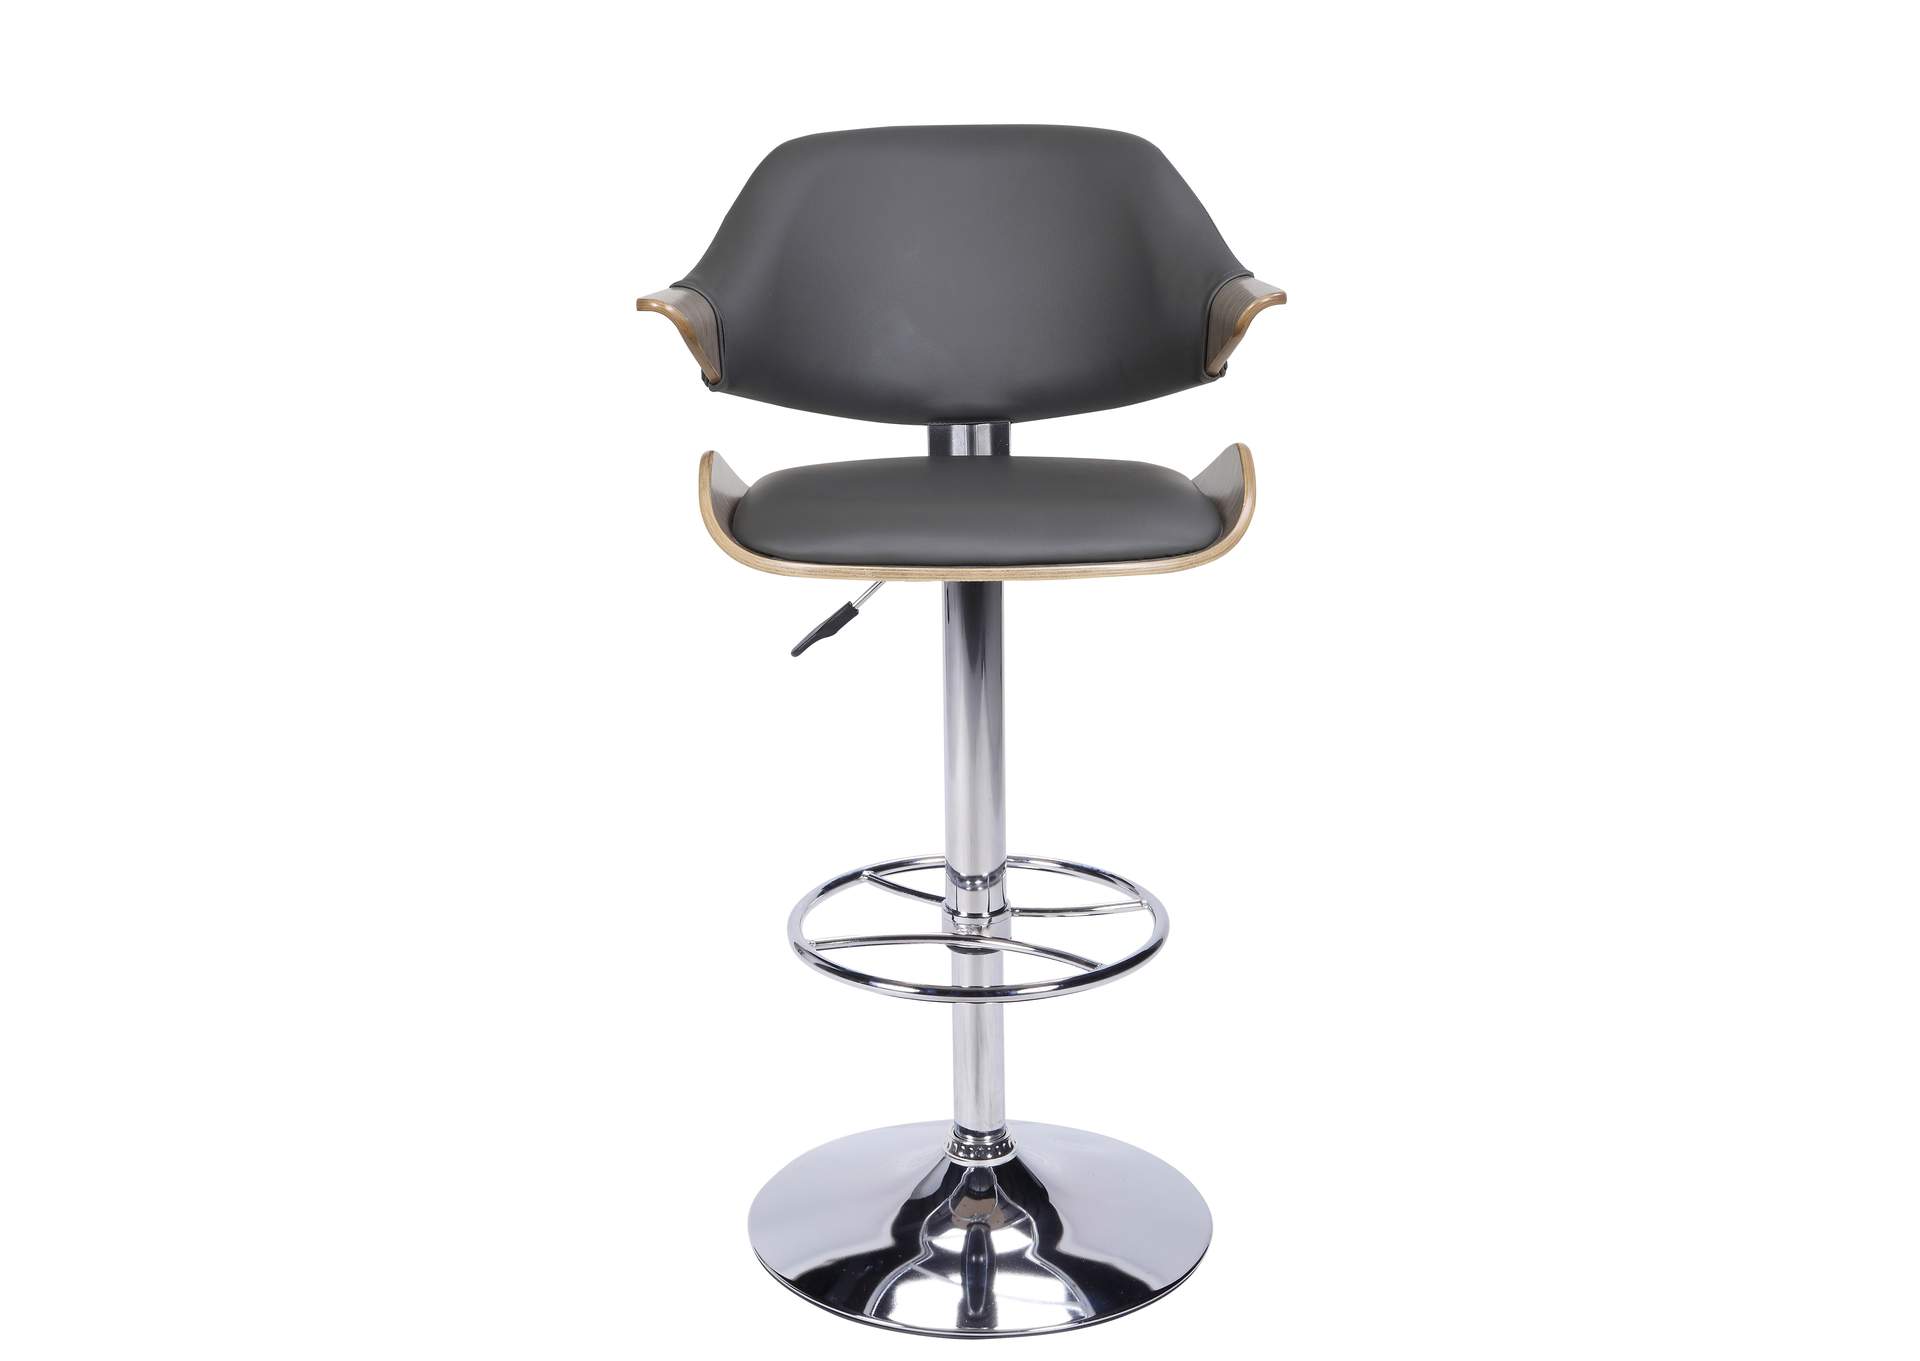 Curved Back Pneumatic-Adjustable Stool,Chintaly Imports